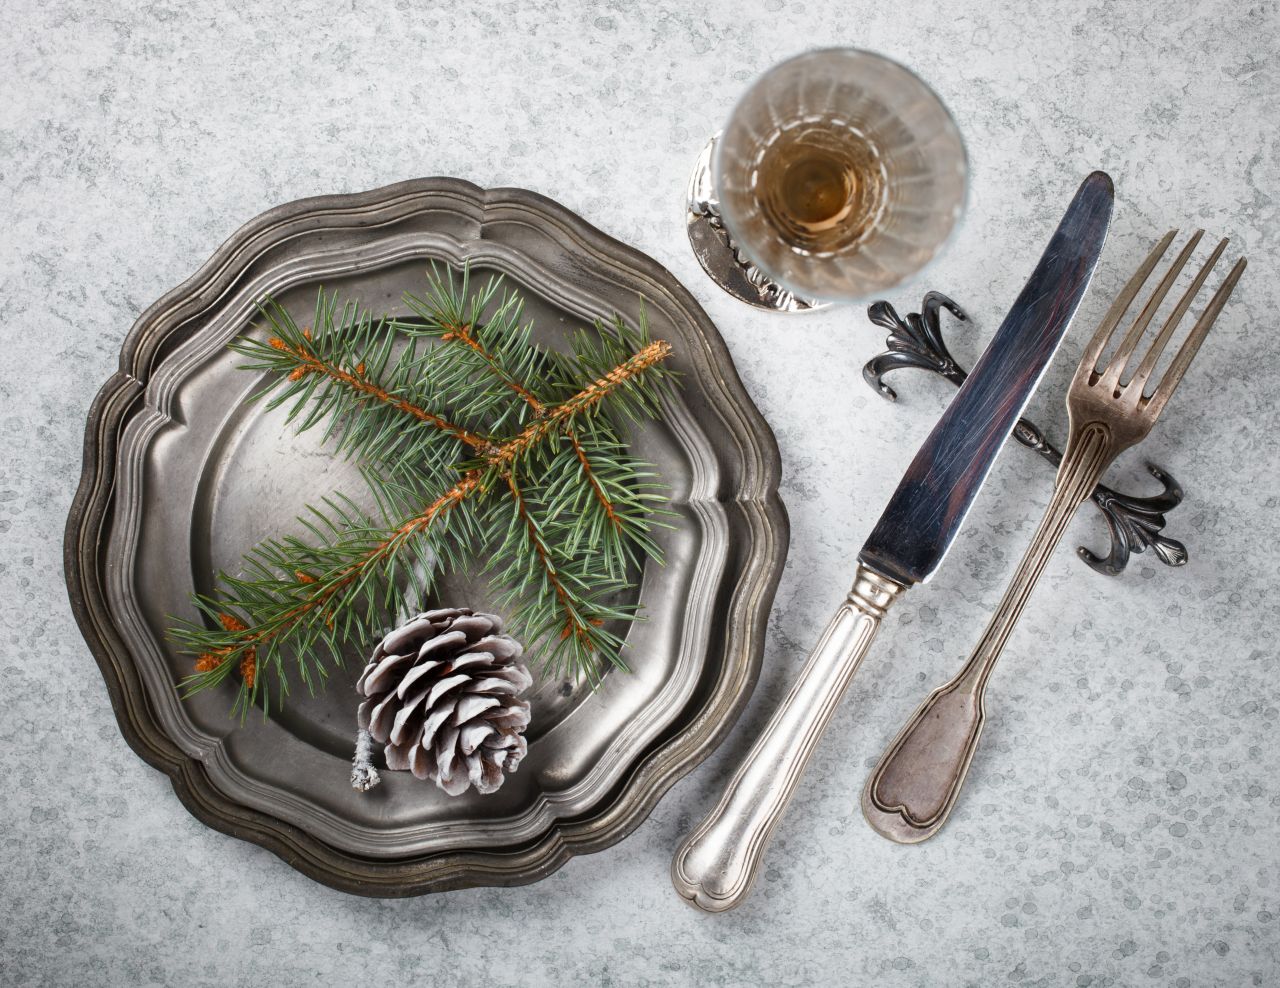 christmas-and-new-year-table-setting-vvbd7lw-1585764994.jpg